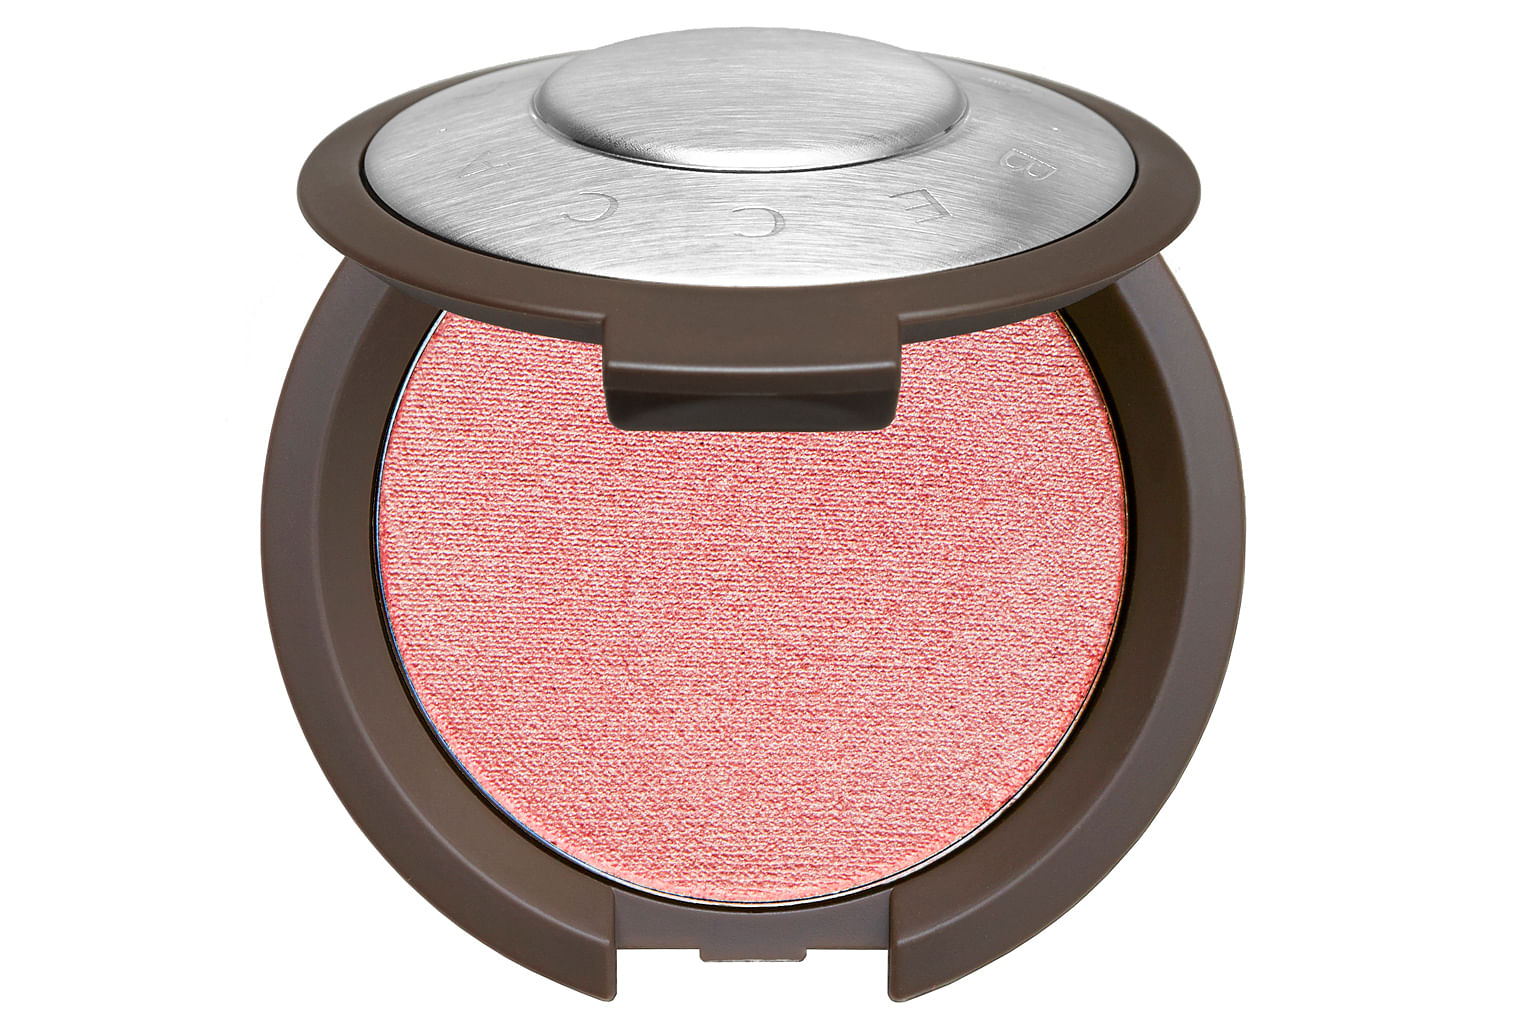 Becca Shimmering Skin Perfector Luminous Blush. Cover FX Pressed Mineral Foundation. SilkyGirl Big Eye Waterproof Collagen Mascara. Model (above) whose eyebrows were shaped using the Shu Uemura brow:sword (above right), which has an in-built sharpene